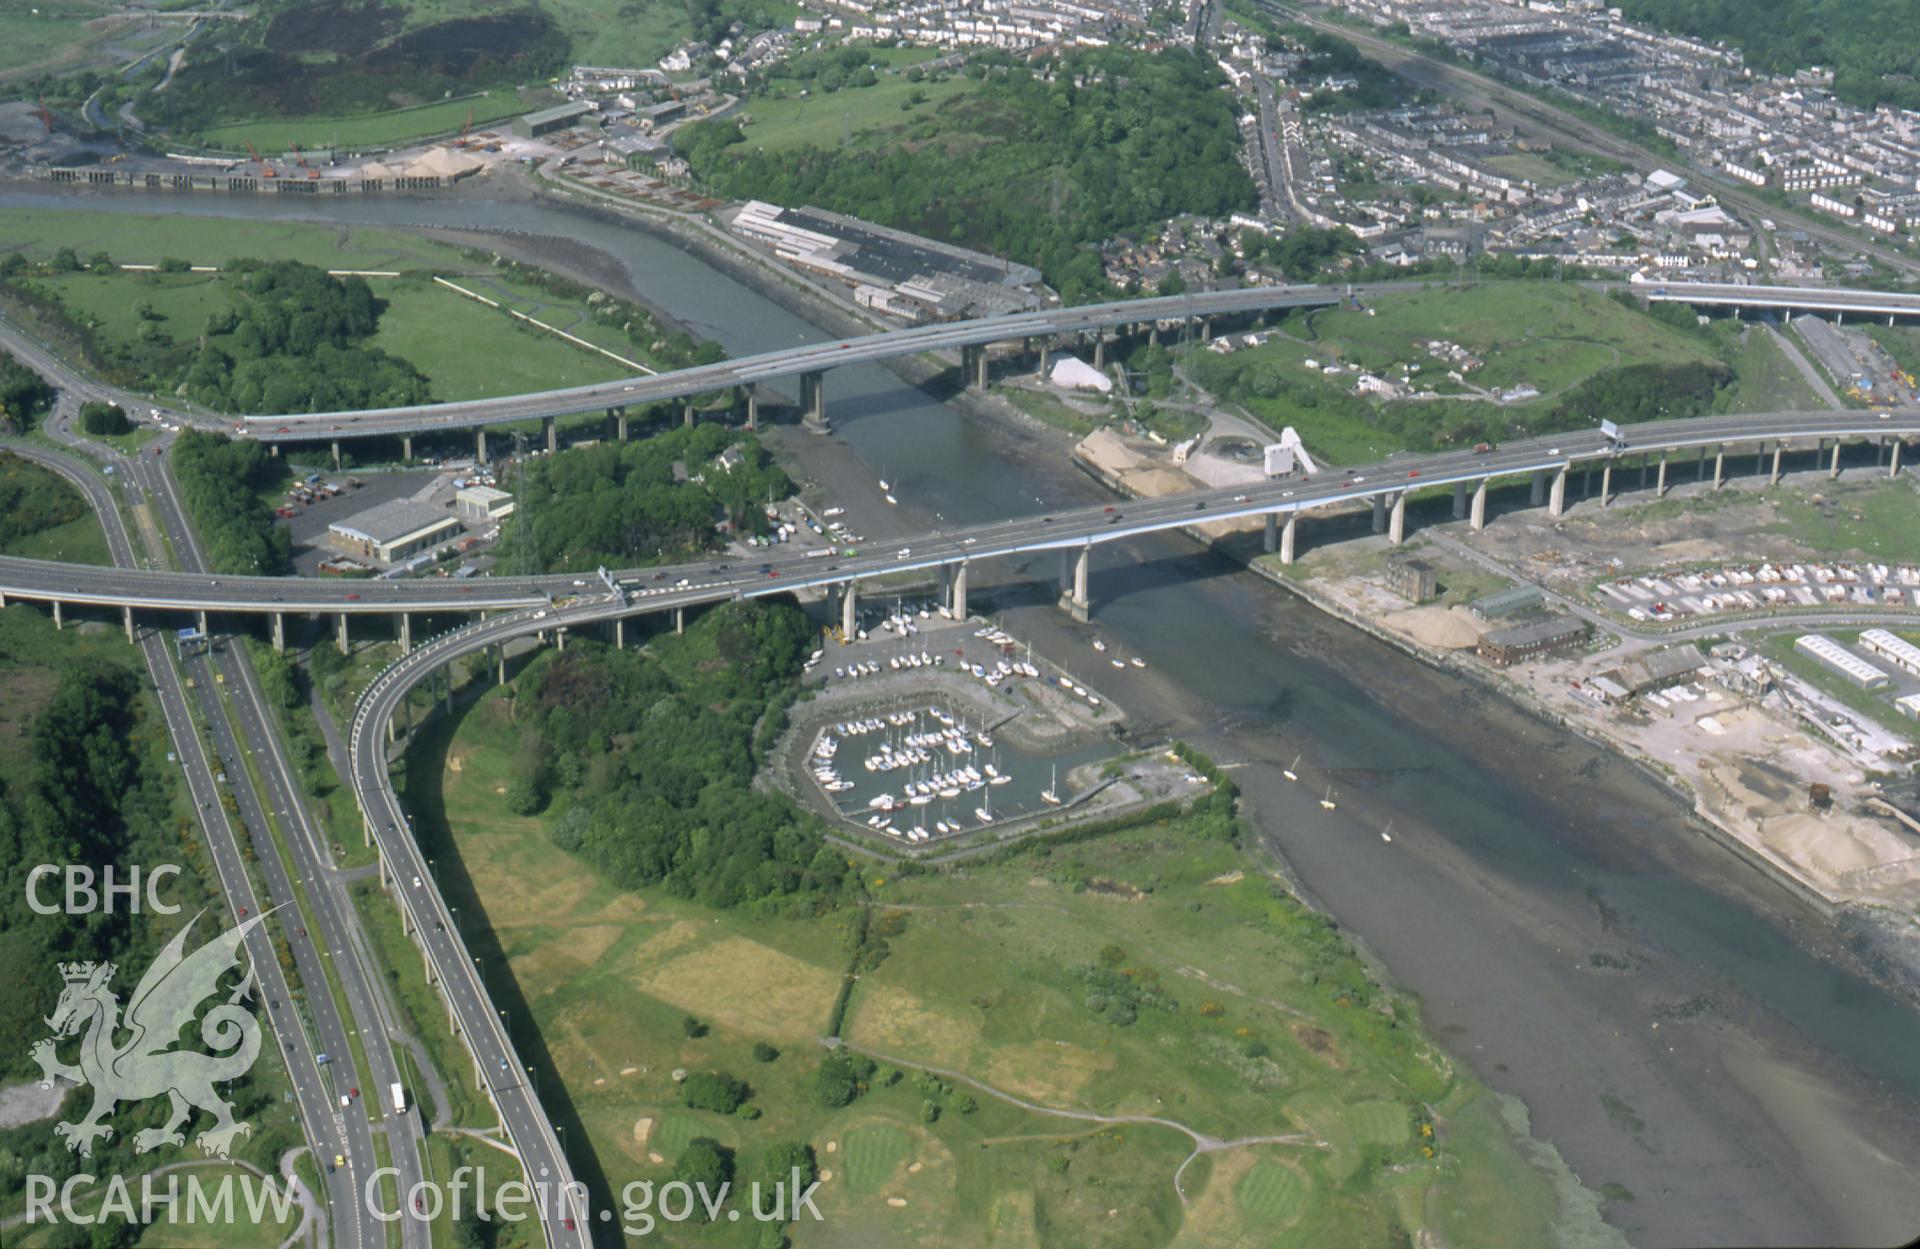 Slide of RCAHMW colour oblique aerial photograph of Briton Ferry Dock, taken by T.G. Driver, 22/5/2000.